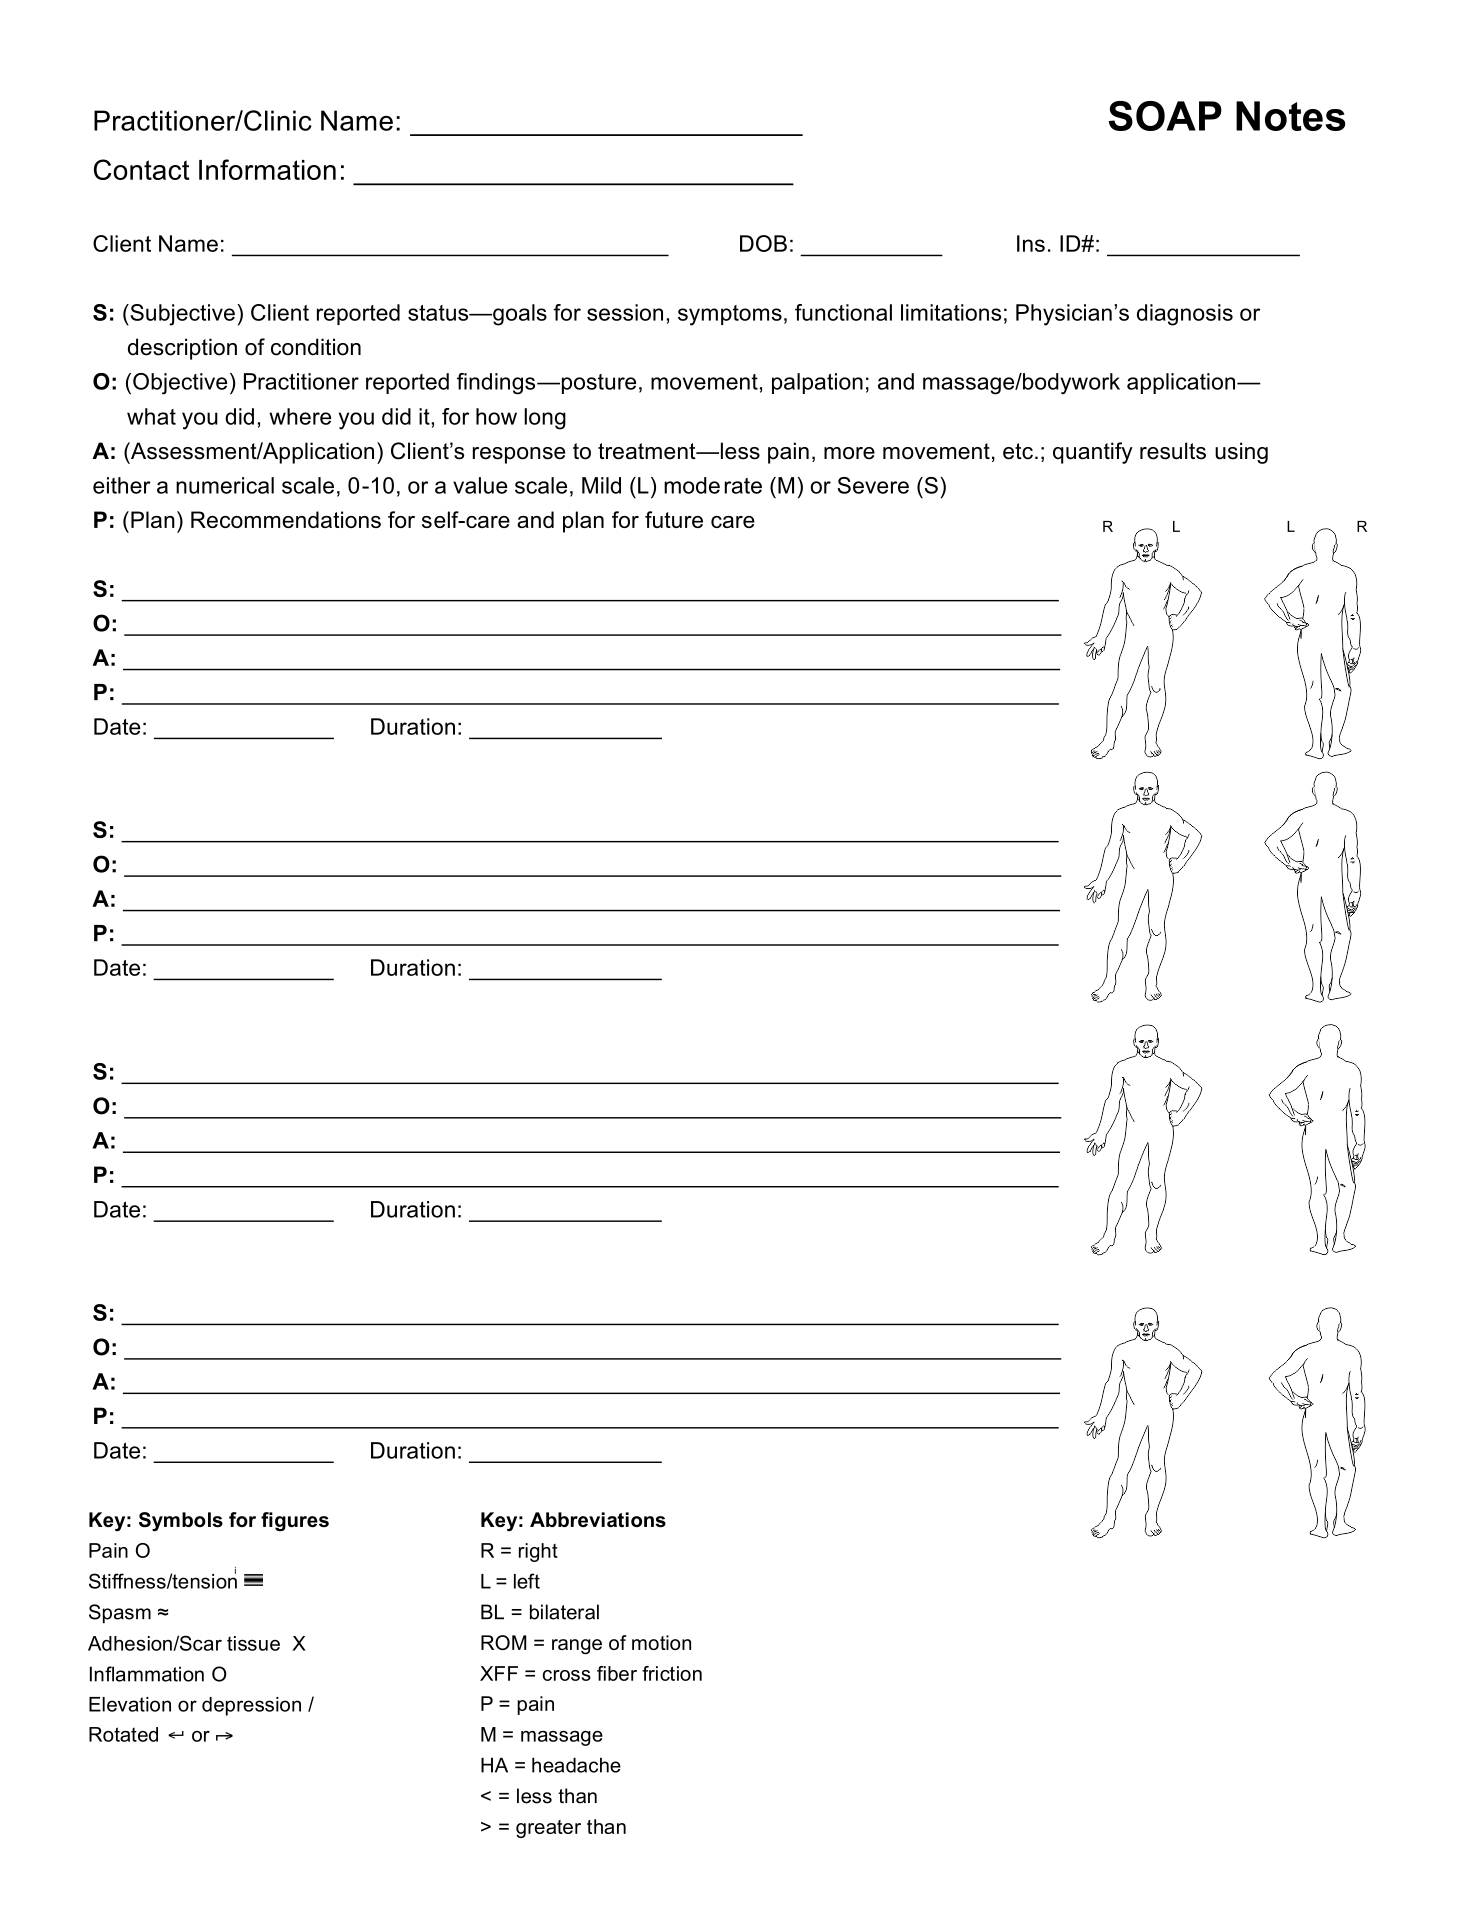 printable-massage-therapy-soap-notes-forms-printable-forms-free-online